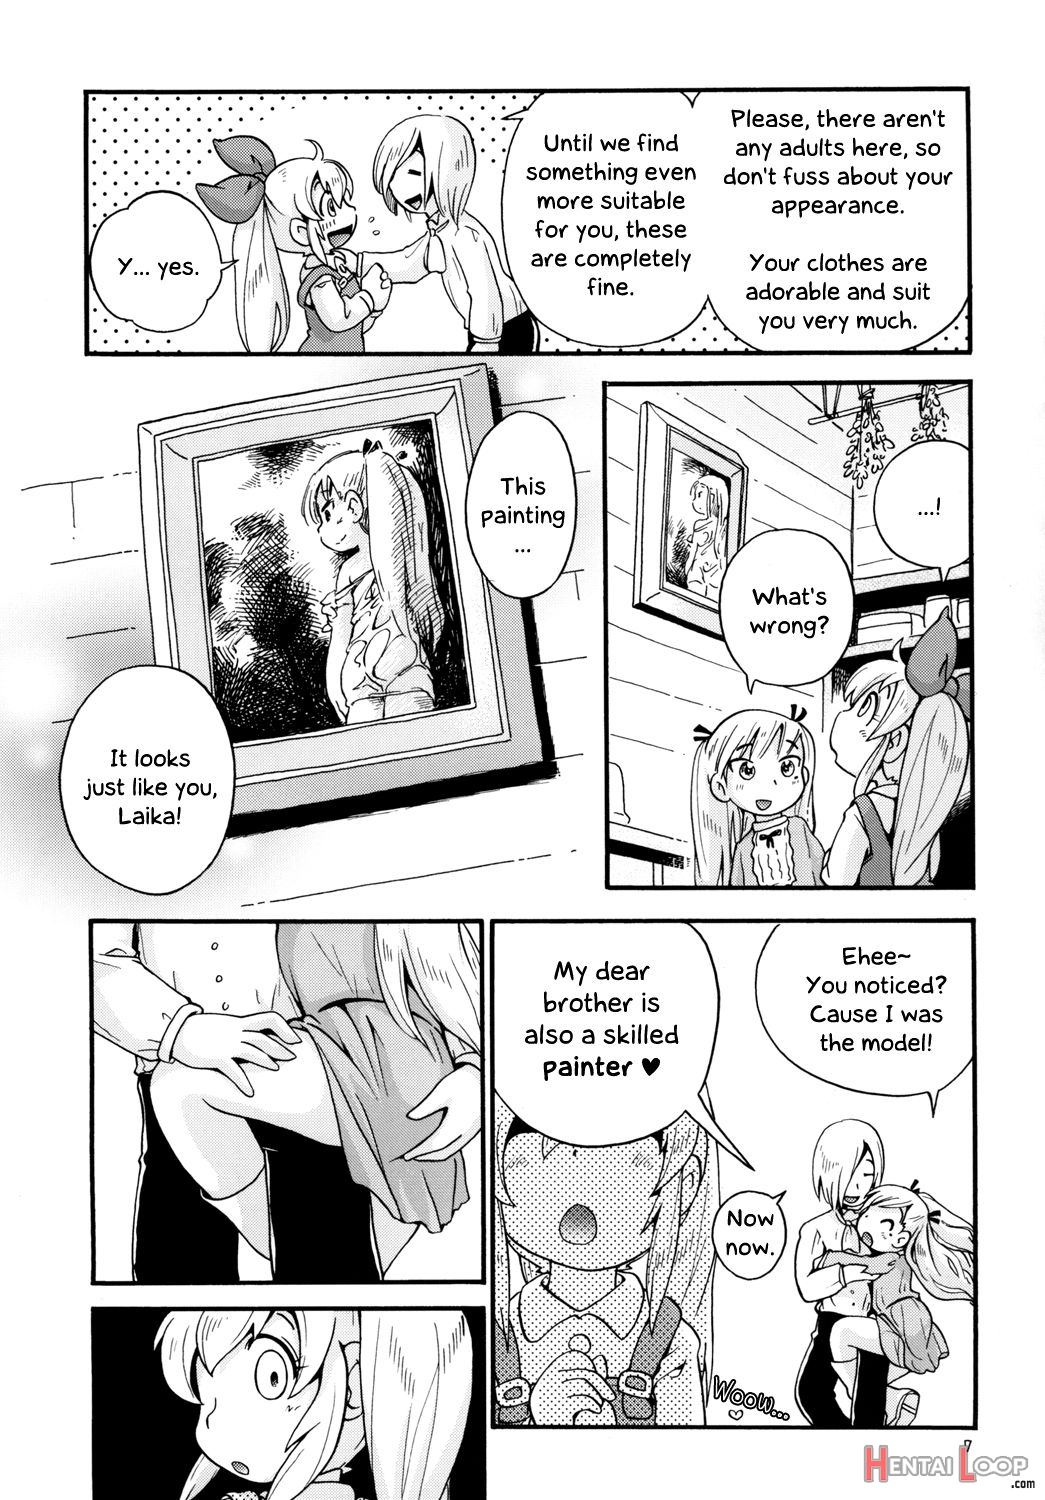 Farm Girl Remy ~the Winter Cottage~ Part 1 page 6